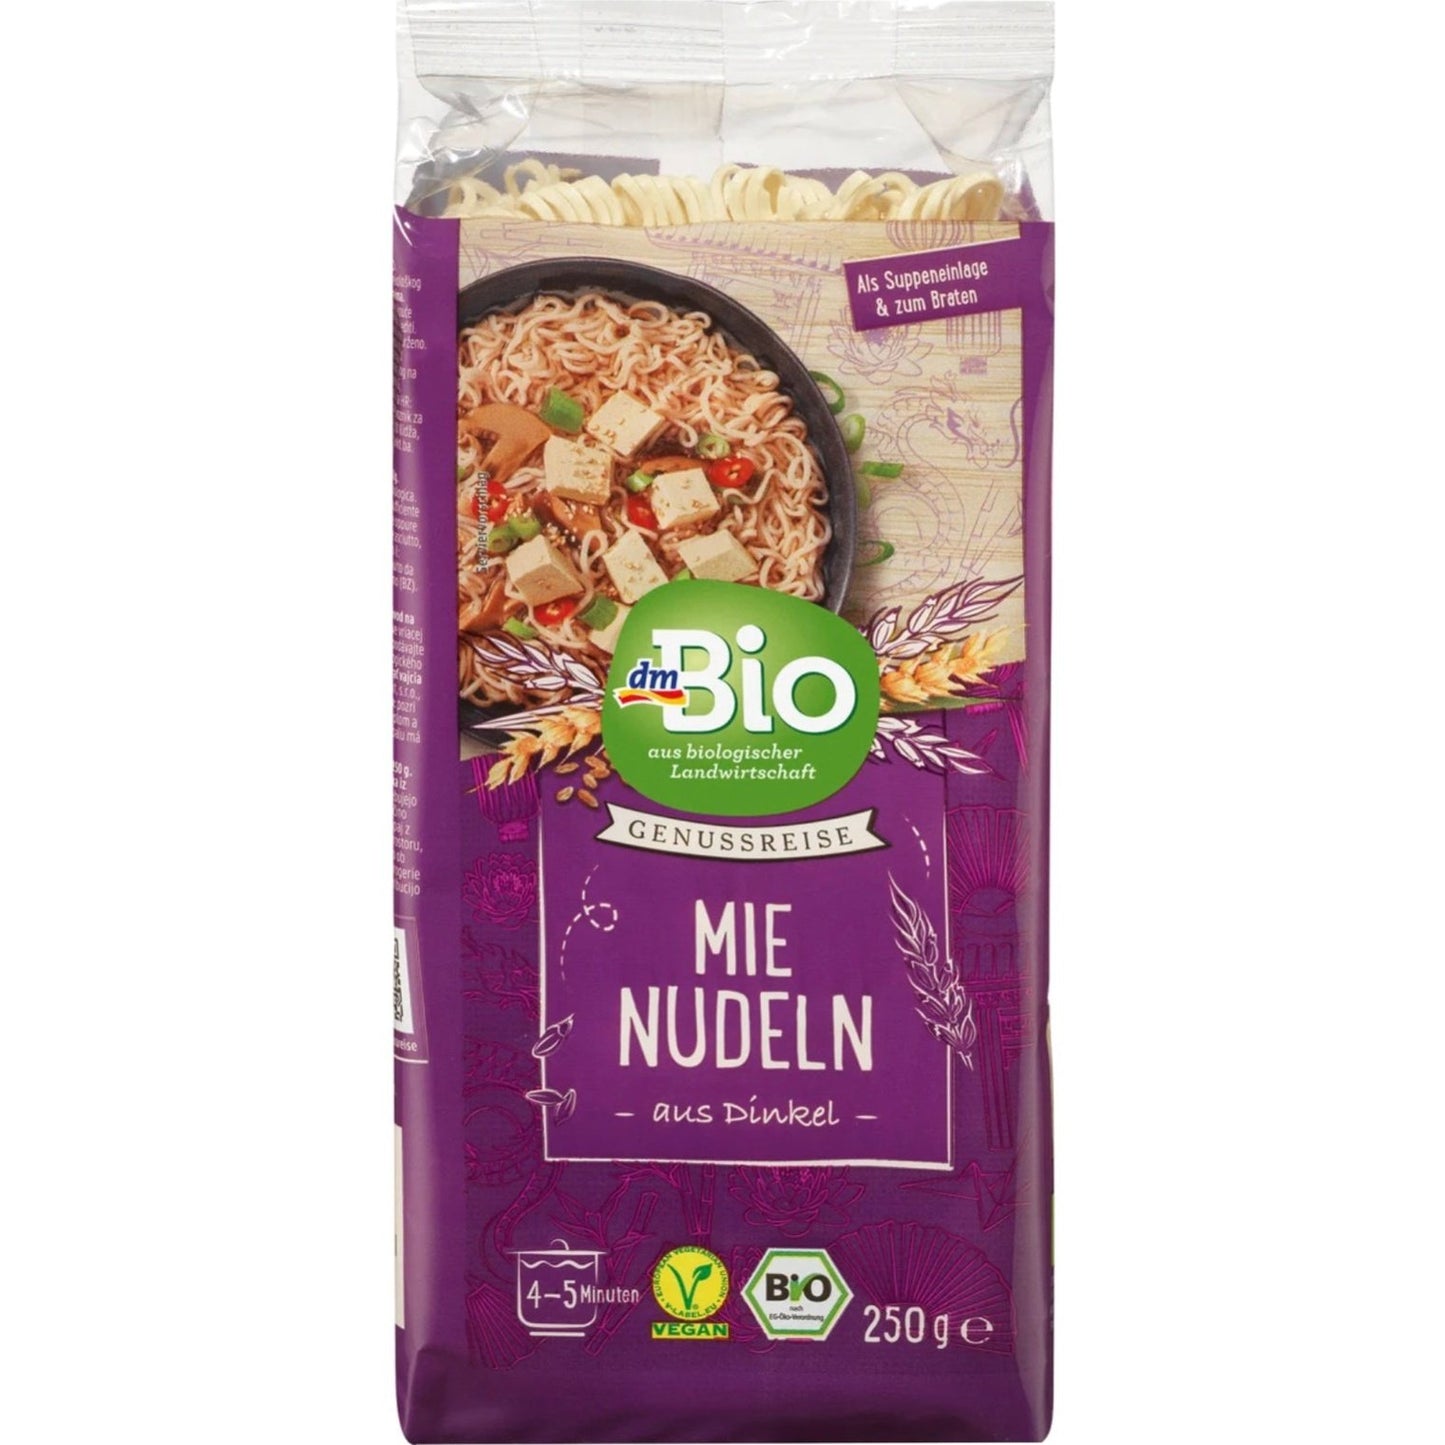 bio organic mie noodle front purple packaging